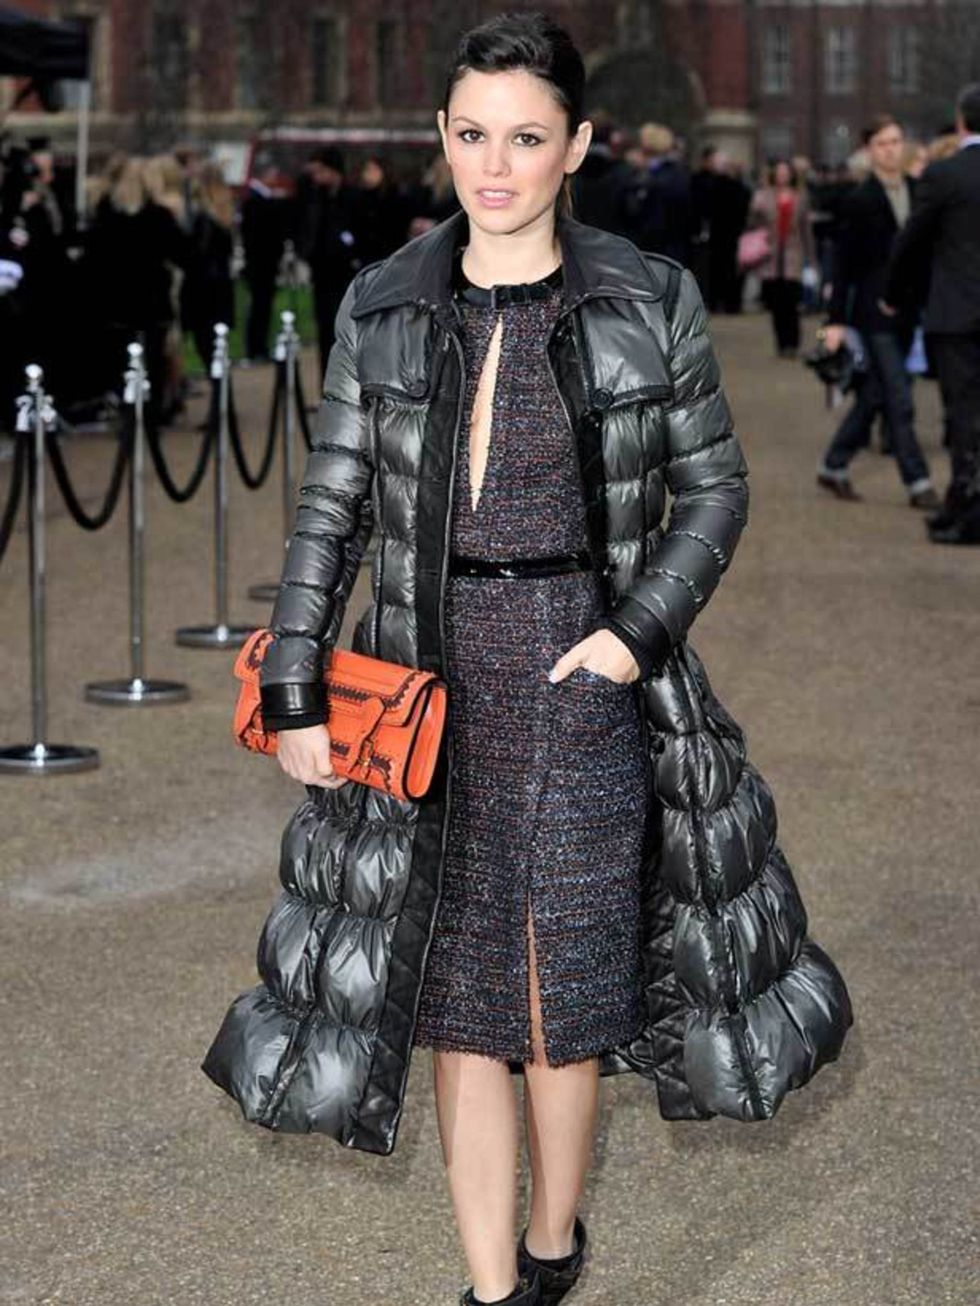 <p><a href="http://www.elleuk.com/starstyle/style-files/%28section%29/Rachel-Bilson">Rachel Bilson</a> in a Burberry puffa at the Burberry AW11 show in London, 21 February 2011</p>